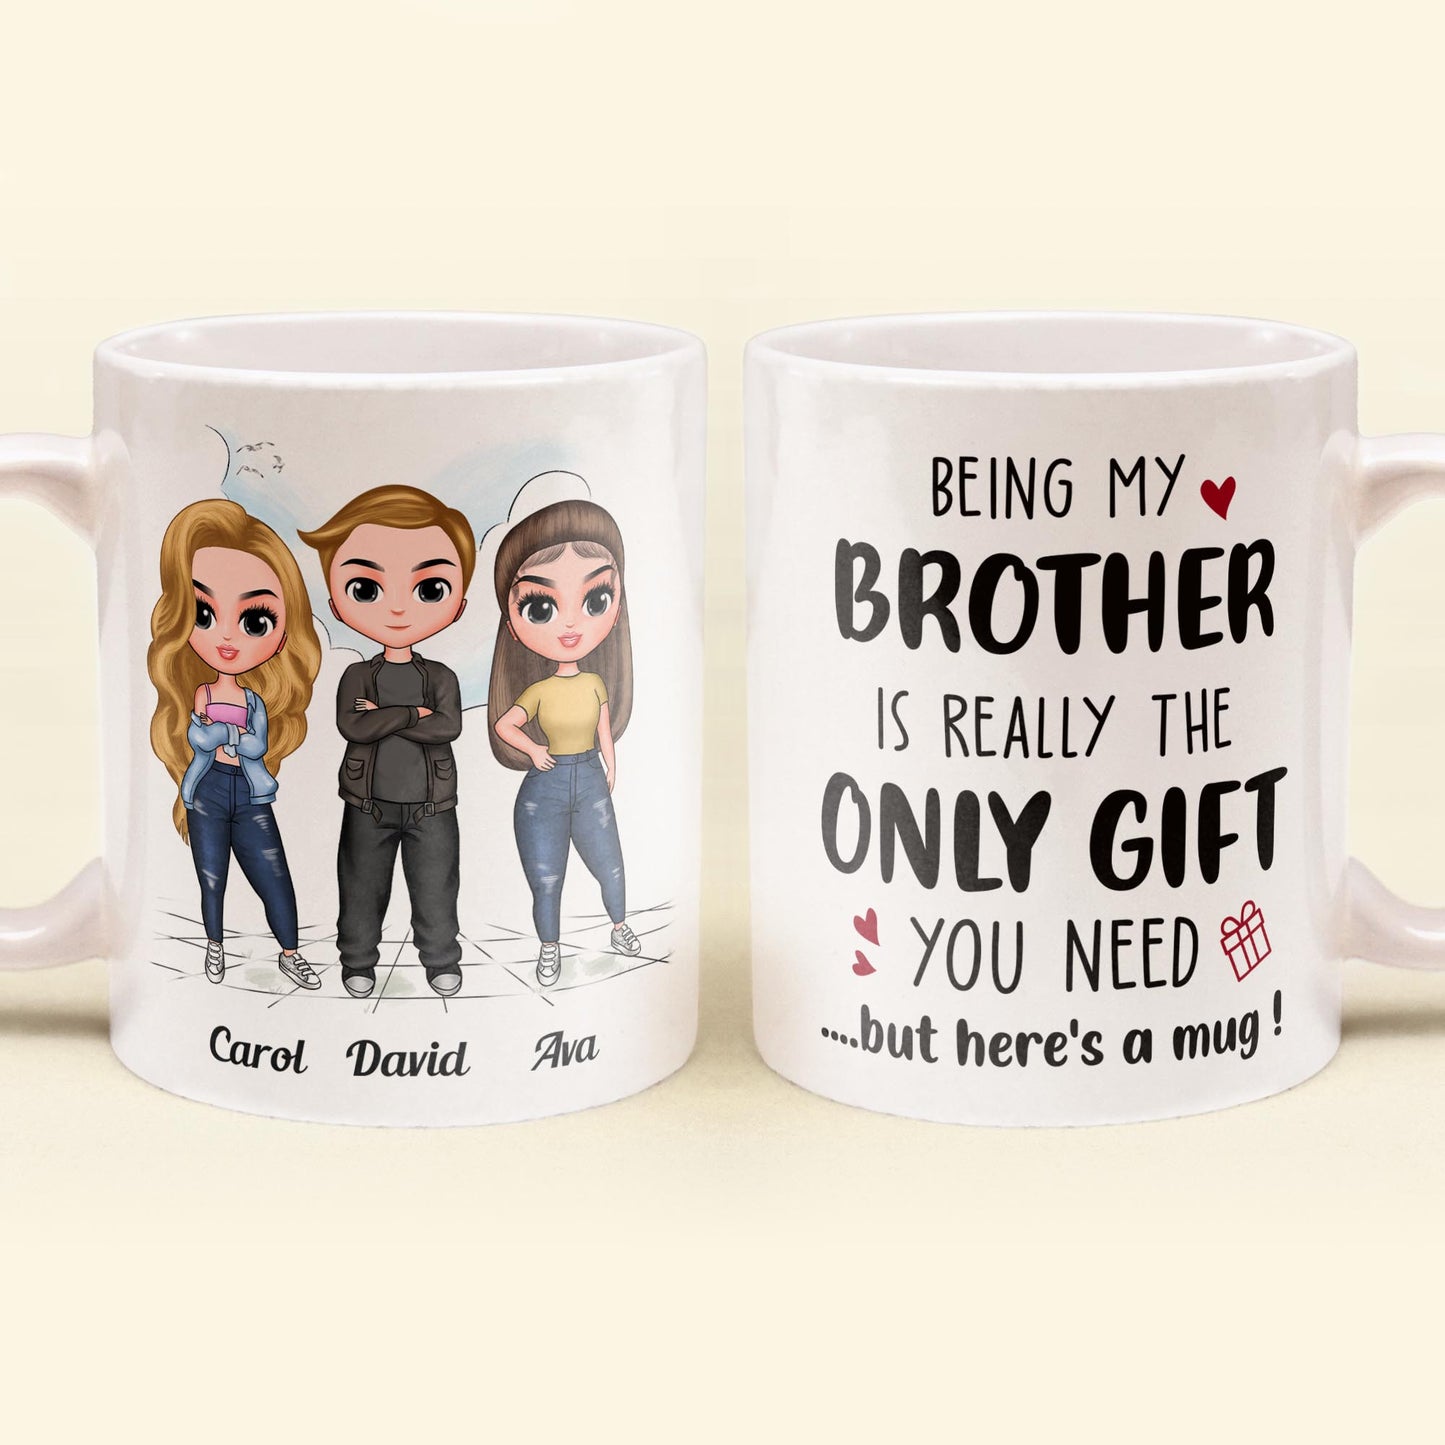 Being My Brother Is Really The Only Gift You Need - Personalized Mug - Birthday Gift For Brothers, Sisters